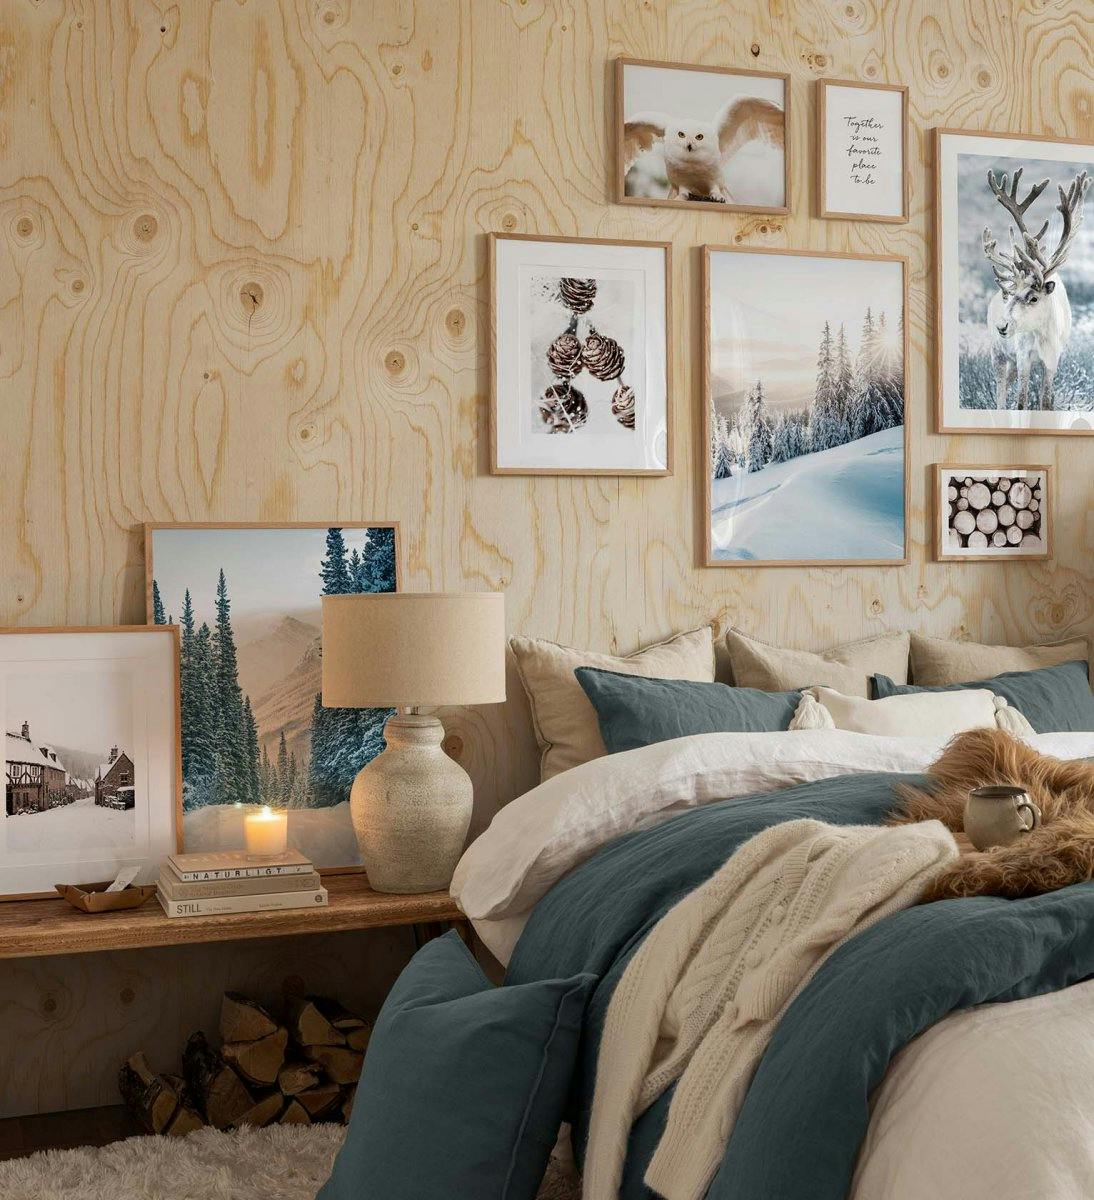 Gallery wall with winter posters in white, brown and green combined with quote prints with oak frames for bedroom